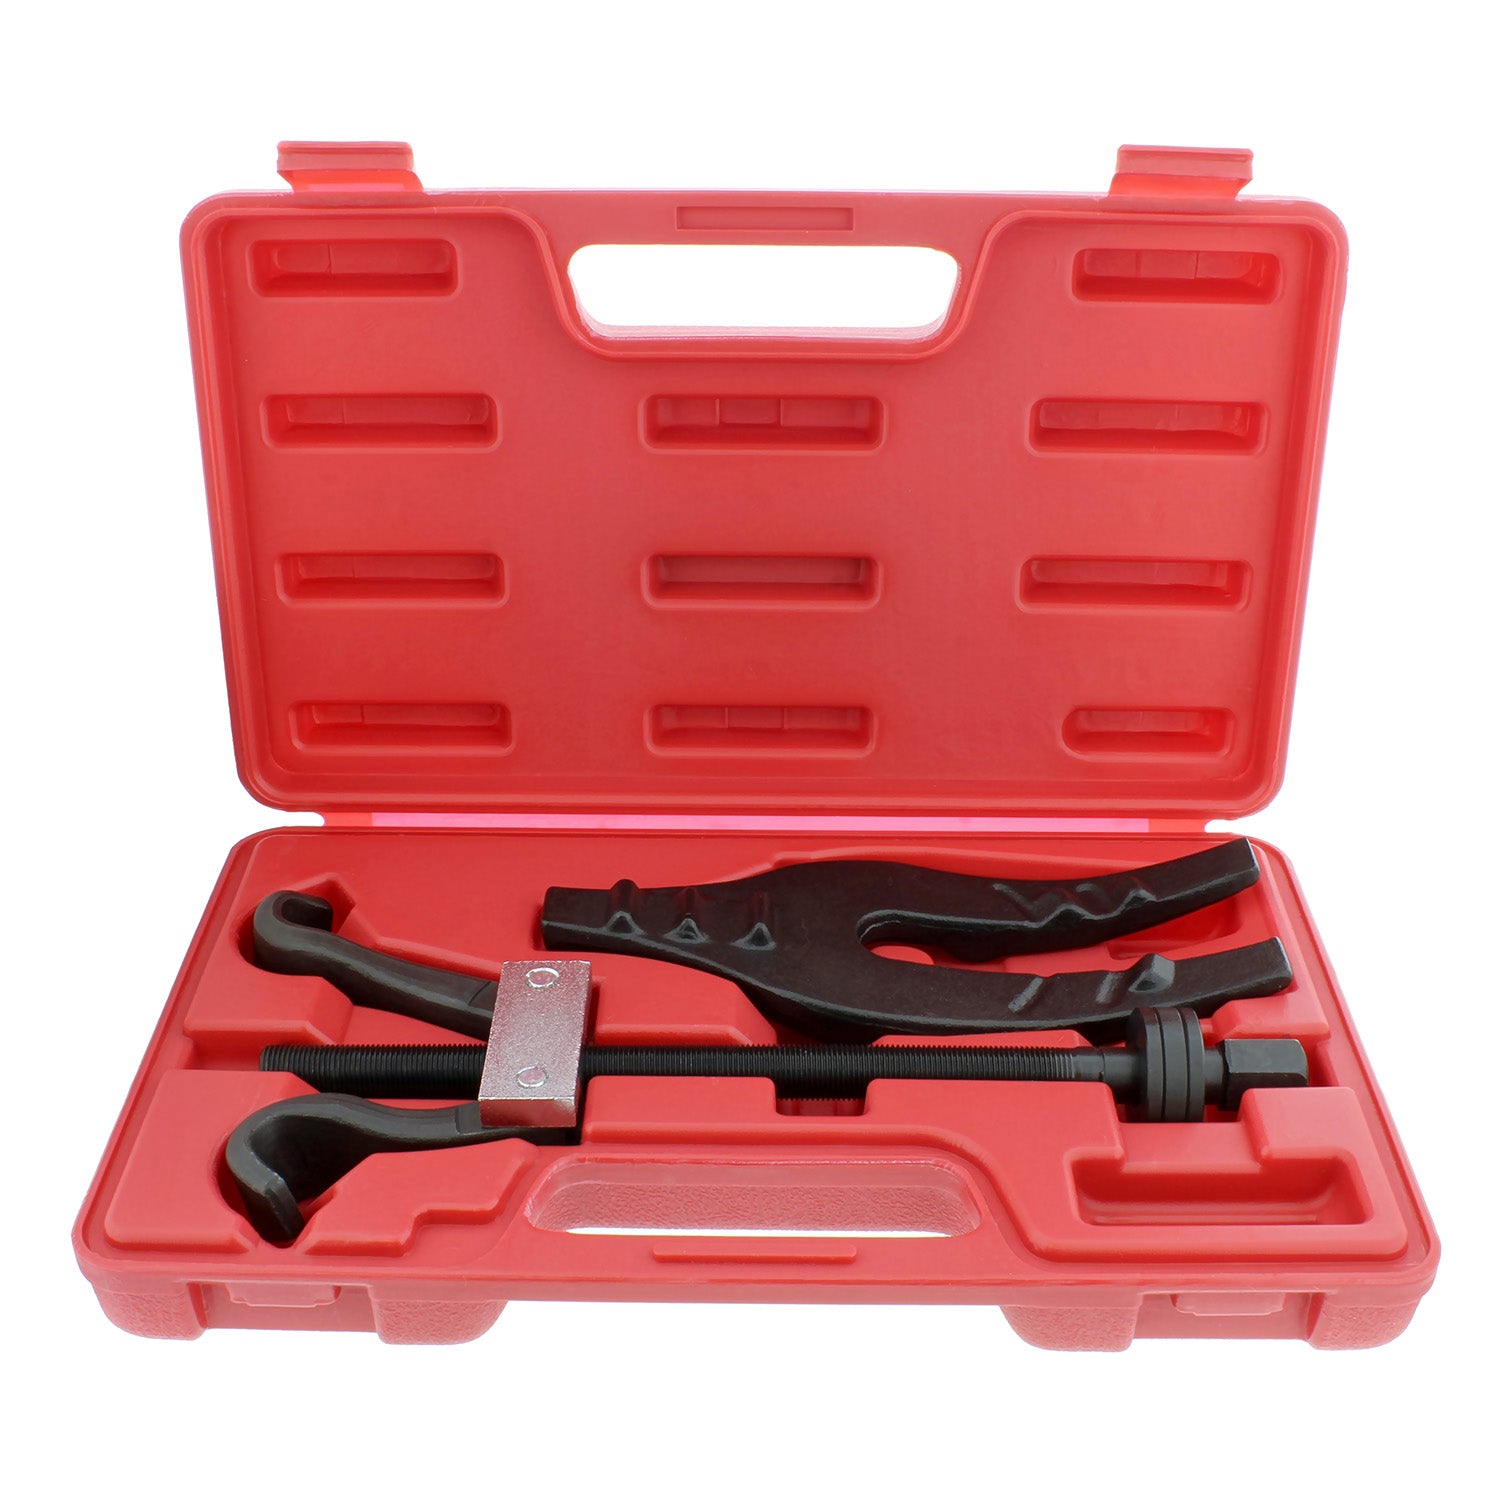 Coil Spring Compressor Tool, Coil Tool, Coil Spring Compression Tool